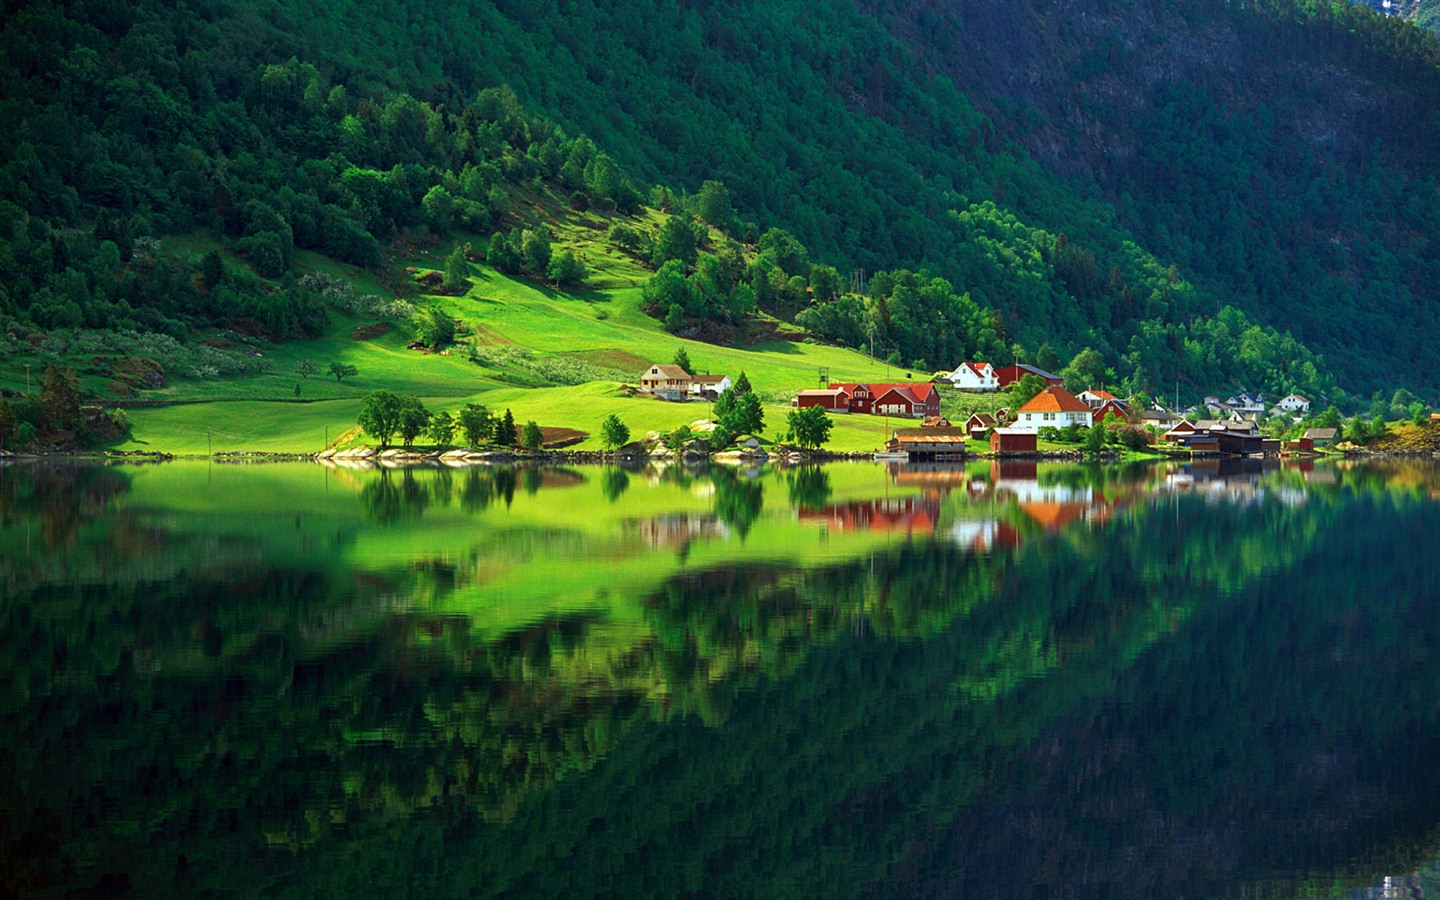 Windows 7 Wallpapers: Nordic Landscapes #10 - 1440x900